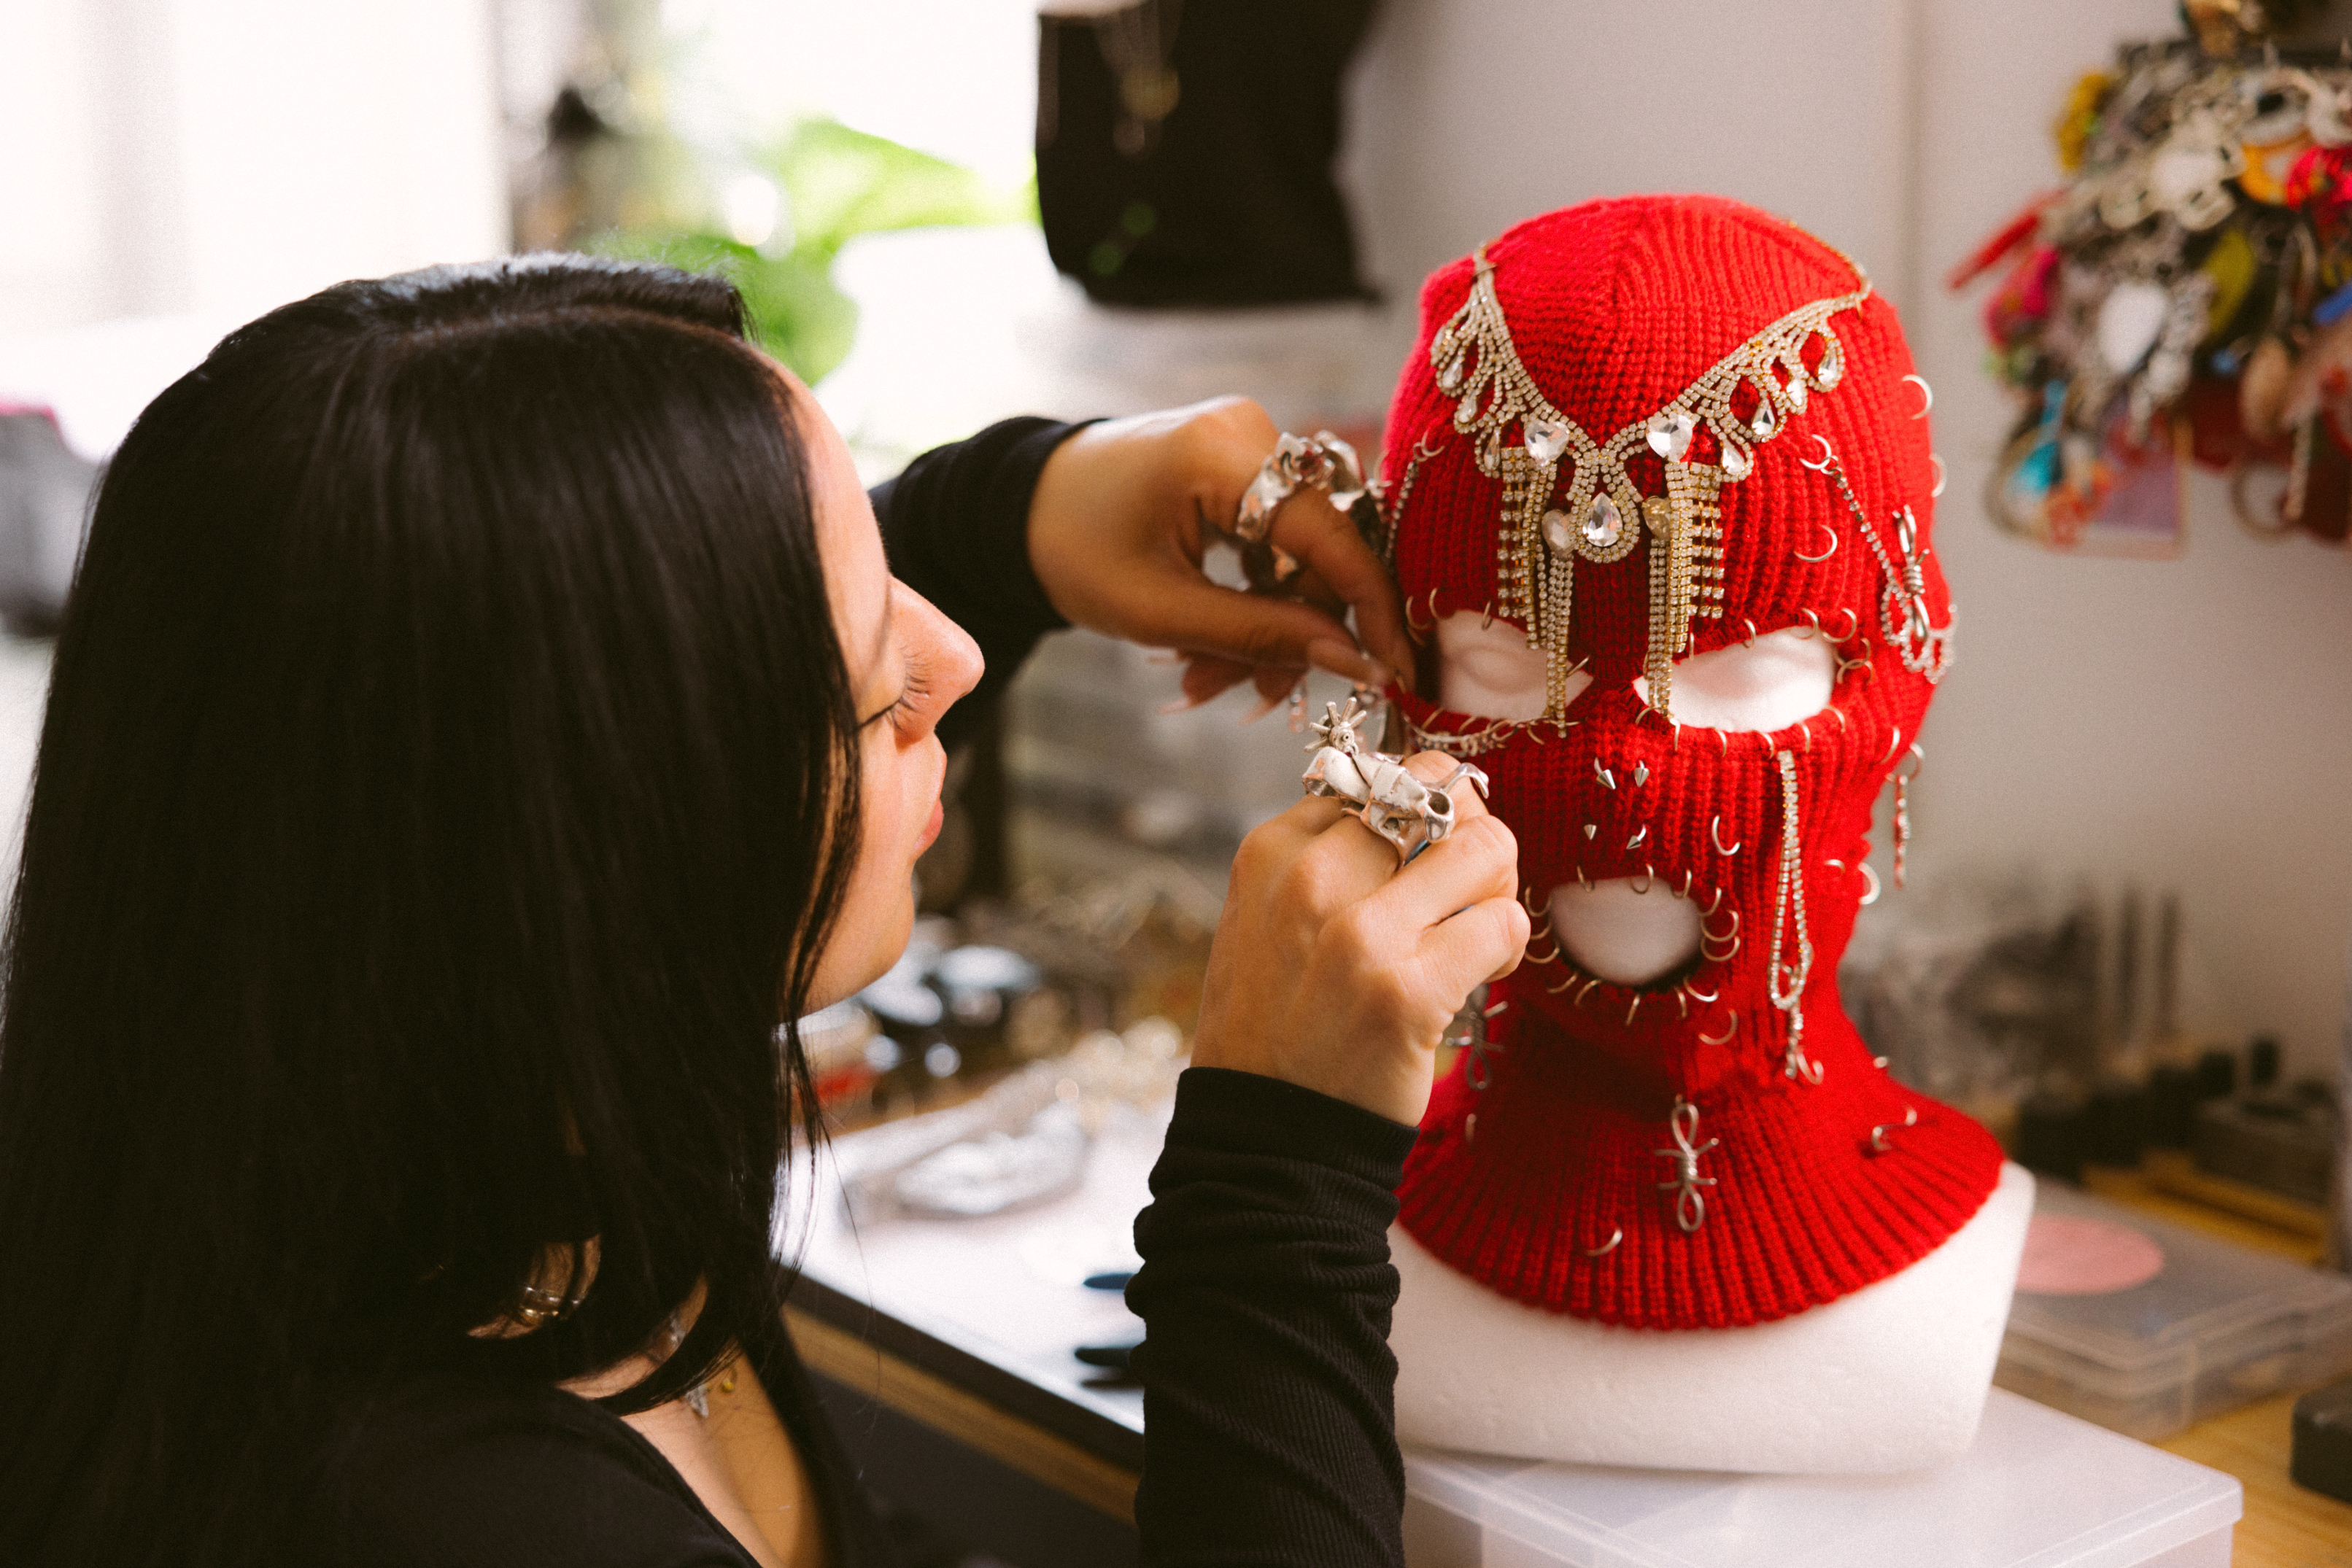 A person customizing a red knit sneaker with embellishments and jewelry